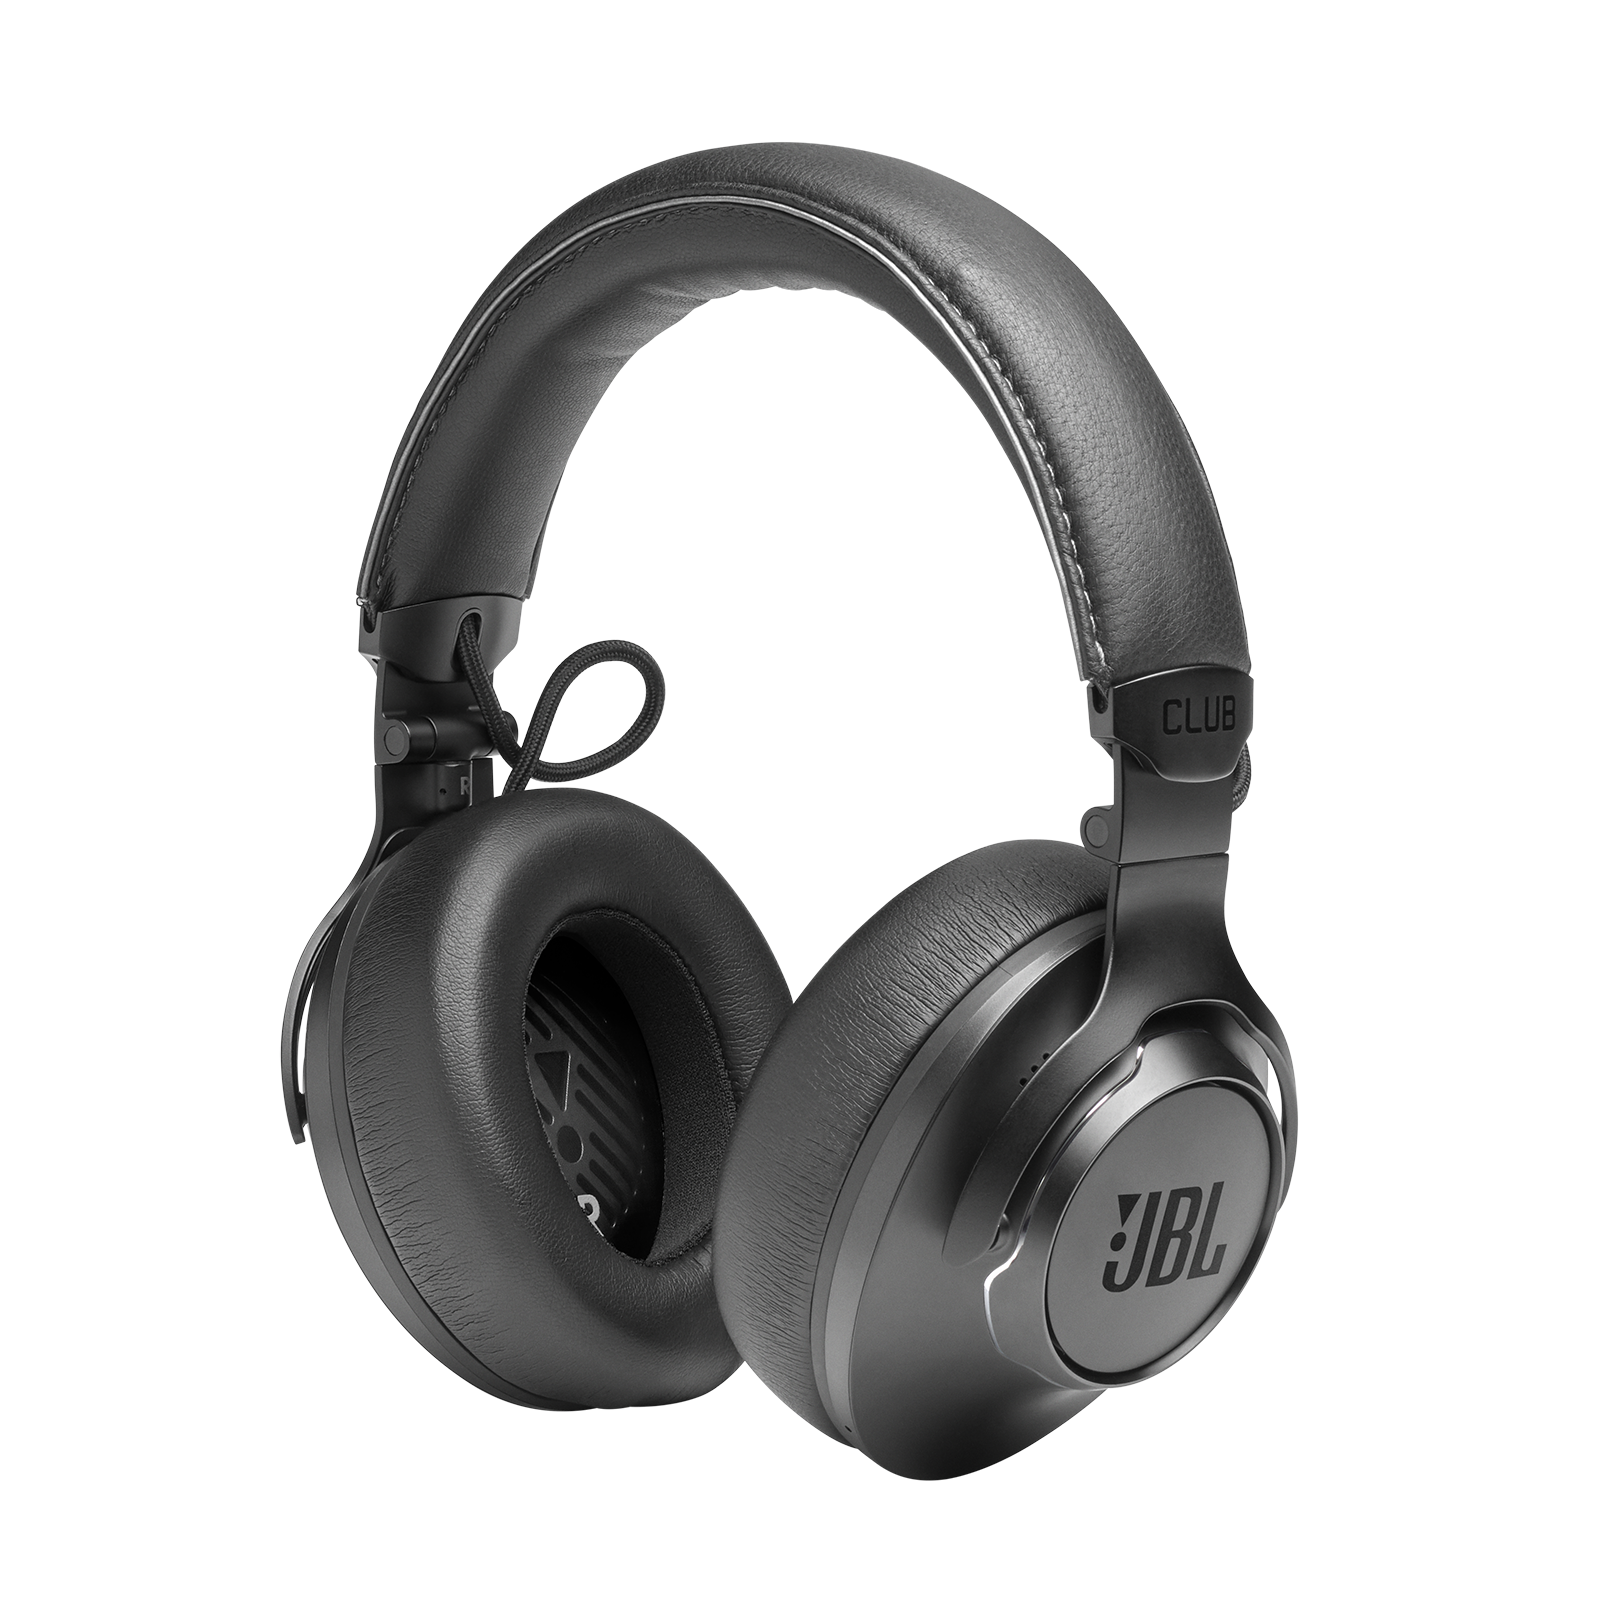 JBL CLUB ONE - Black - Wireless, over-ear, True Adaptive Noise Cancelling headphones inspired by pro musicians - Detailshot 5